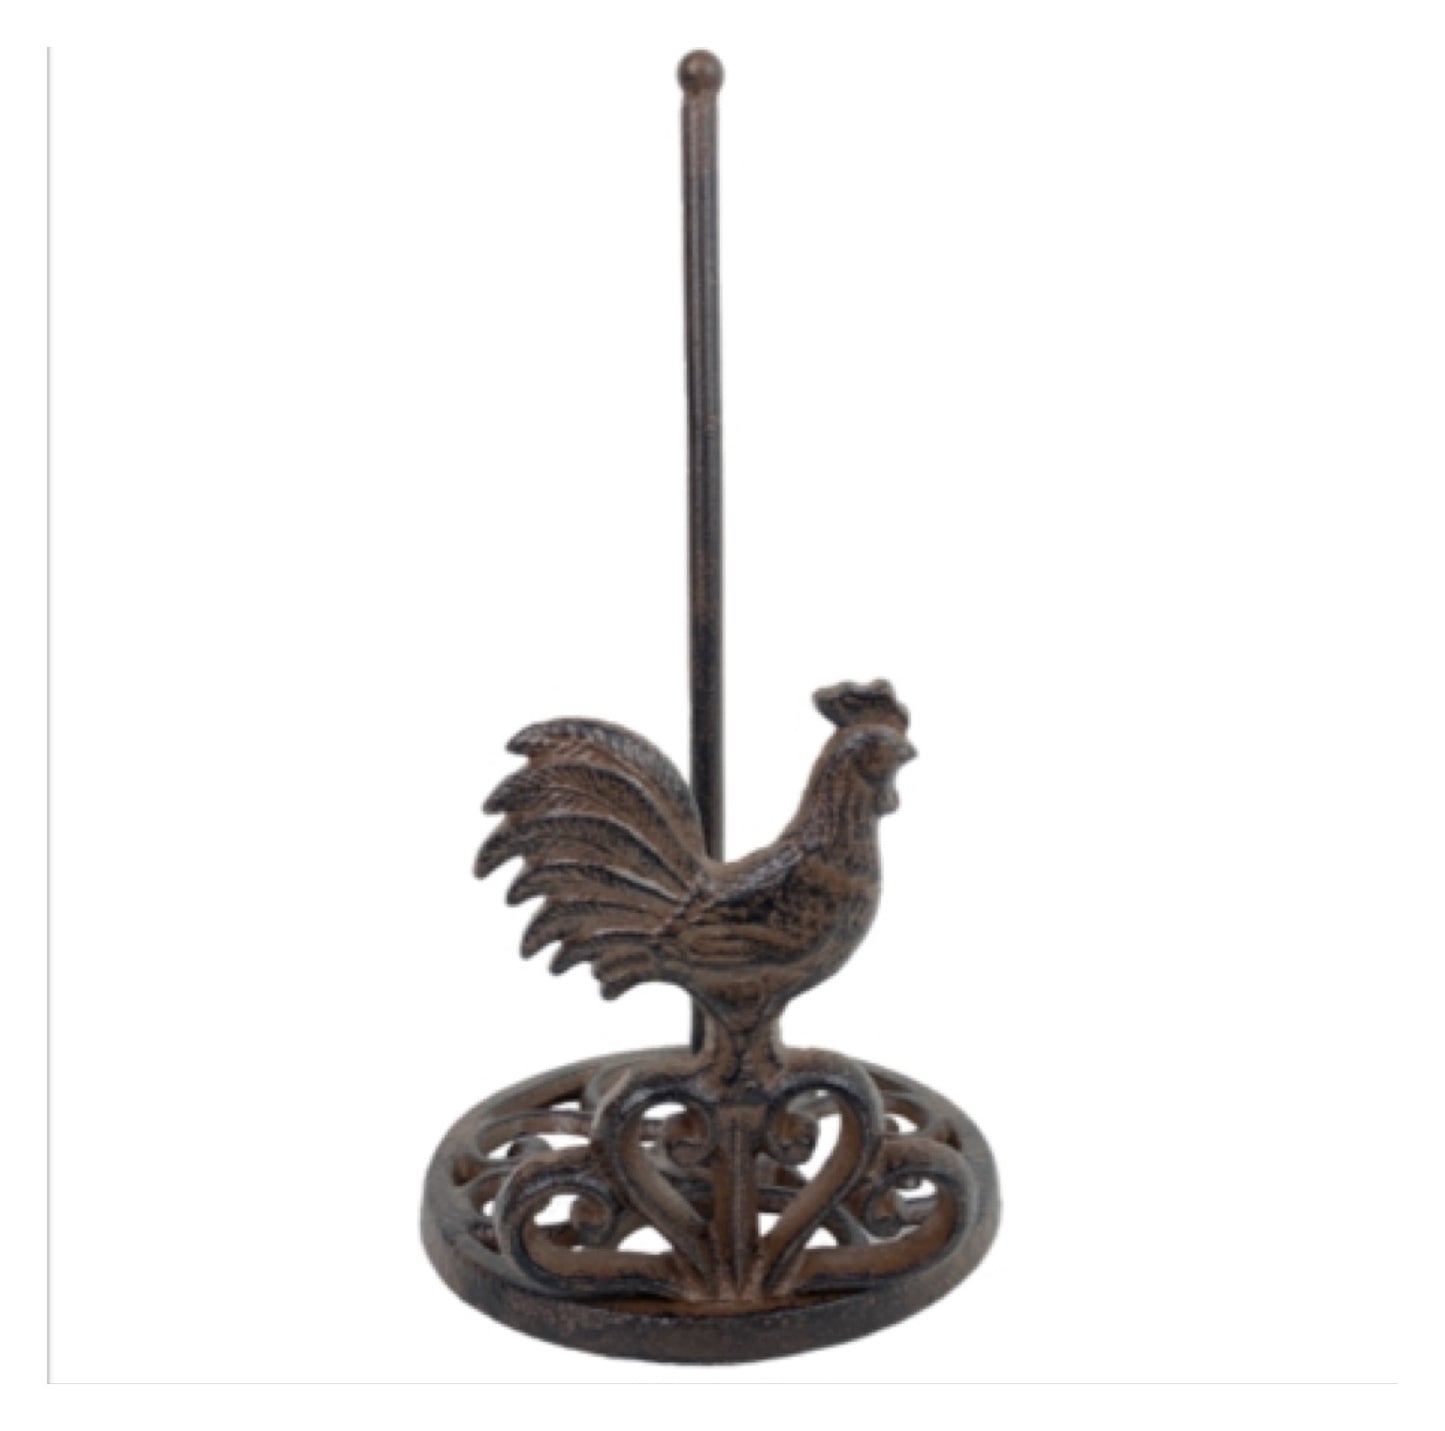 Rooster Kitchen Paper Towel Dispenser Holder - The Renmy Store Homewares & Gifts 